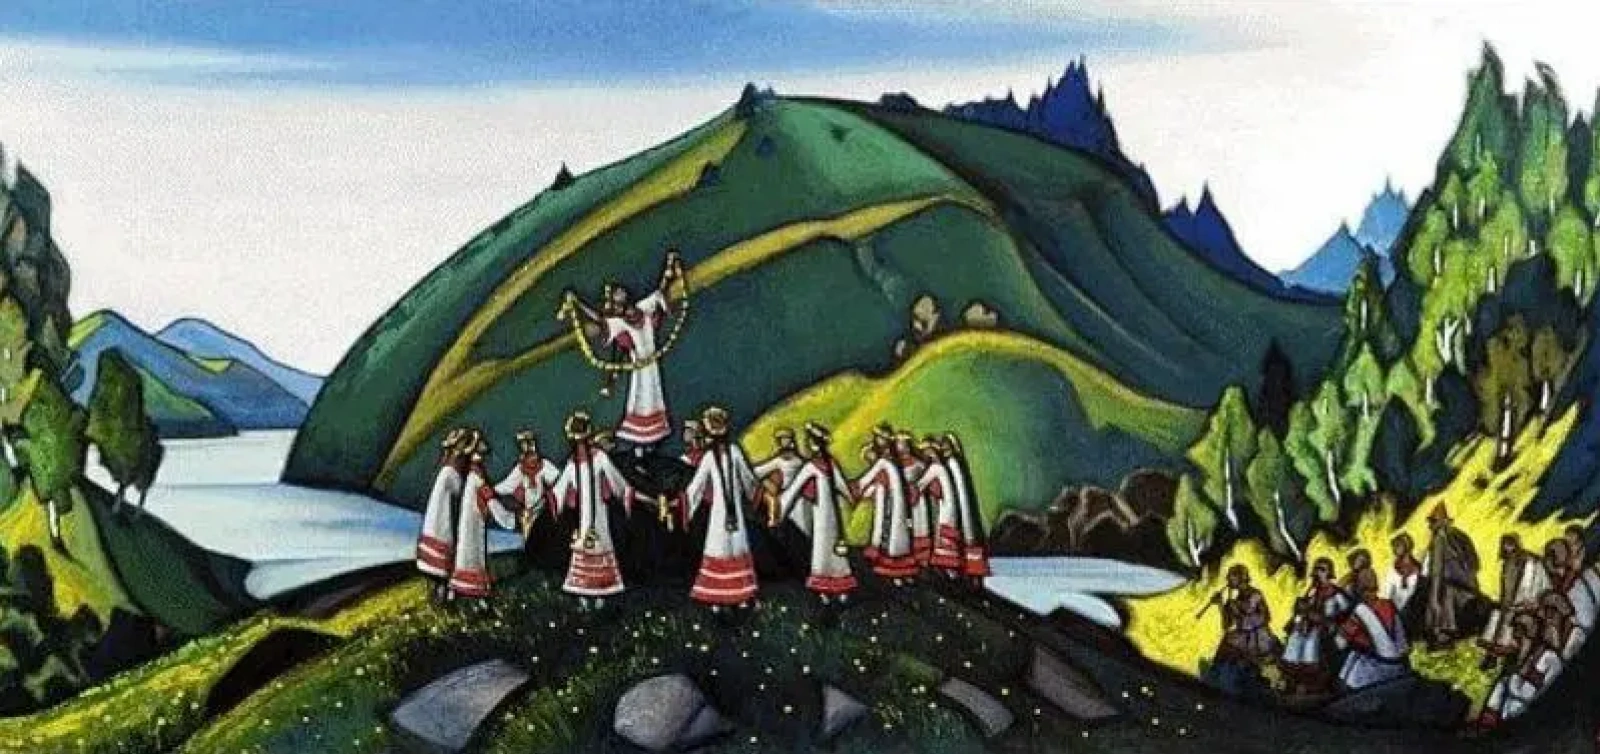 Nicholas Roerich. The Rite Of Spring. Sketch for the ballet "Spring sacred" by I. Stravinsky